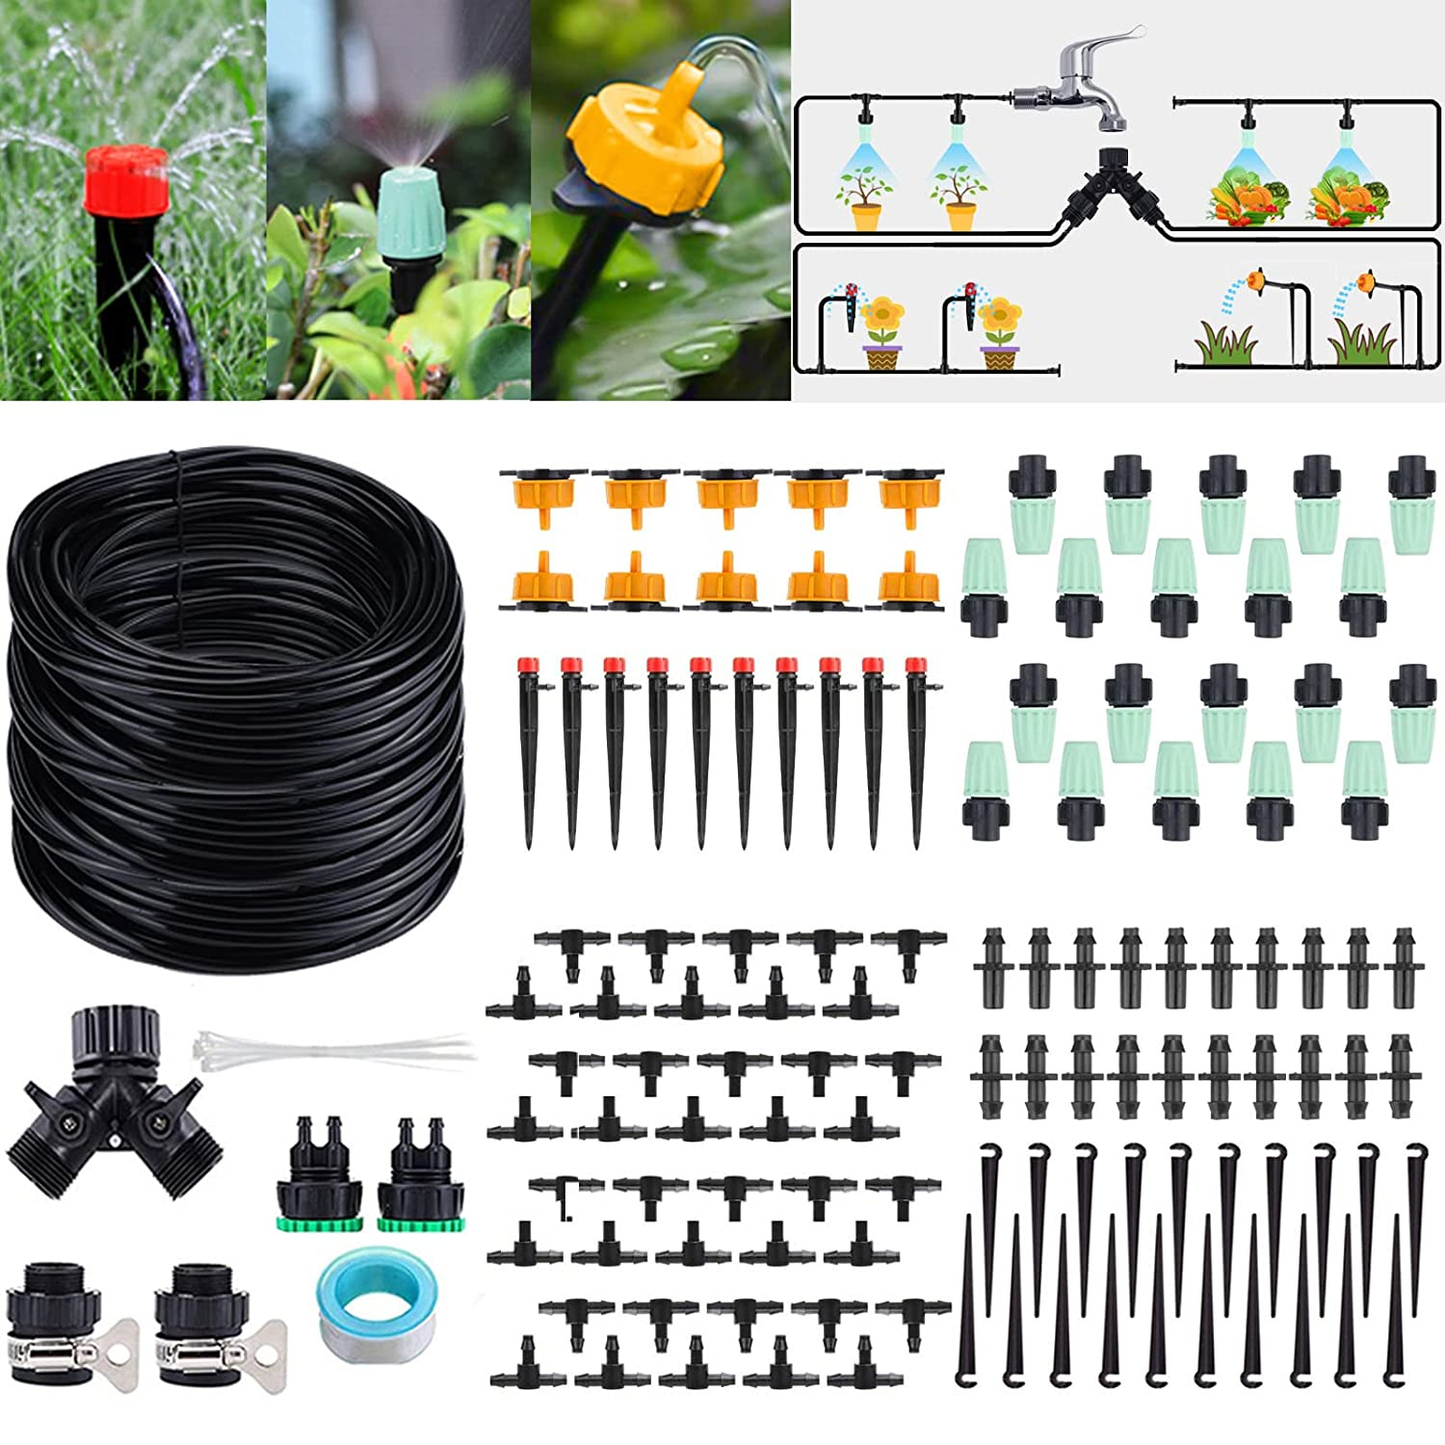 133Ft Irrigation Drip Kit, Automatic Plant Watering System with 40M 1/4 Inch Distribution Tubing Hose, Adjustable Nozzle Emitters Sprinkler